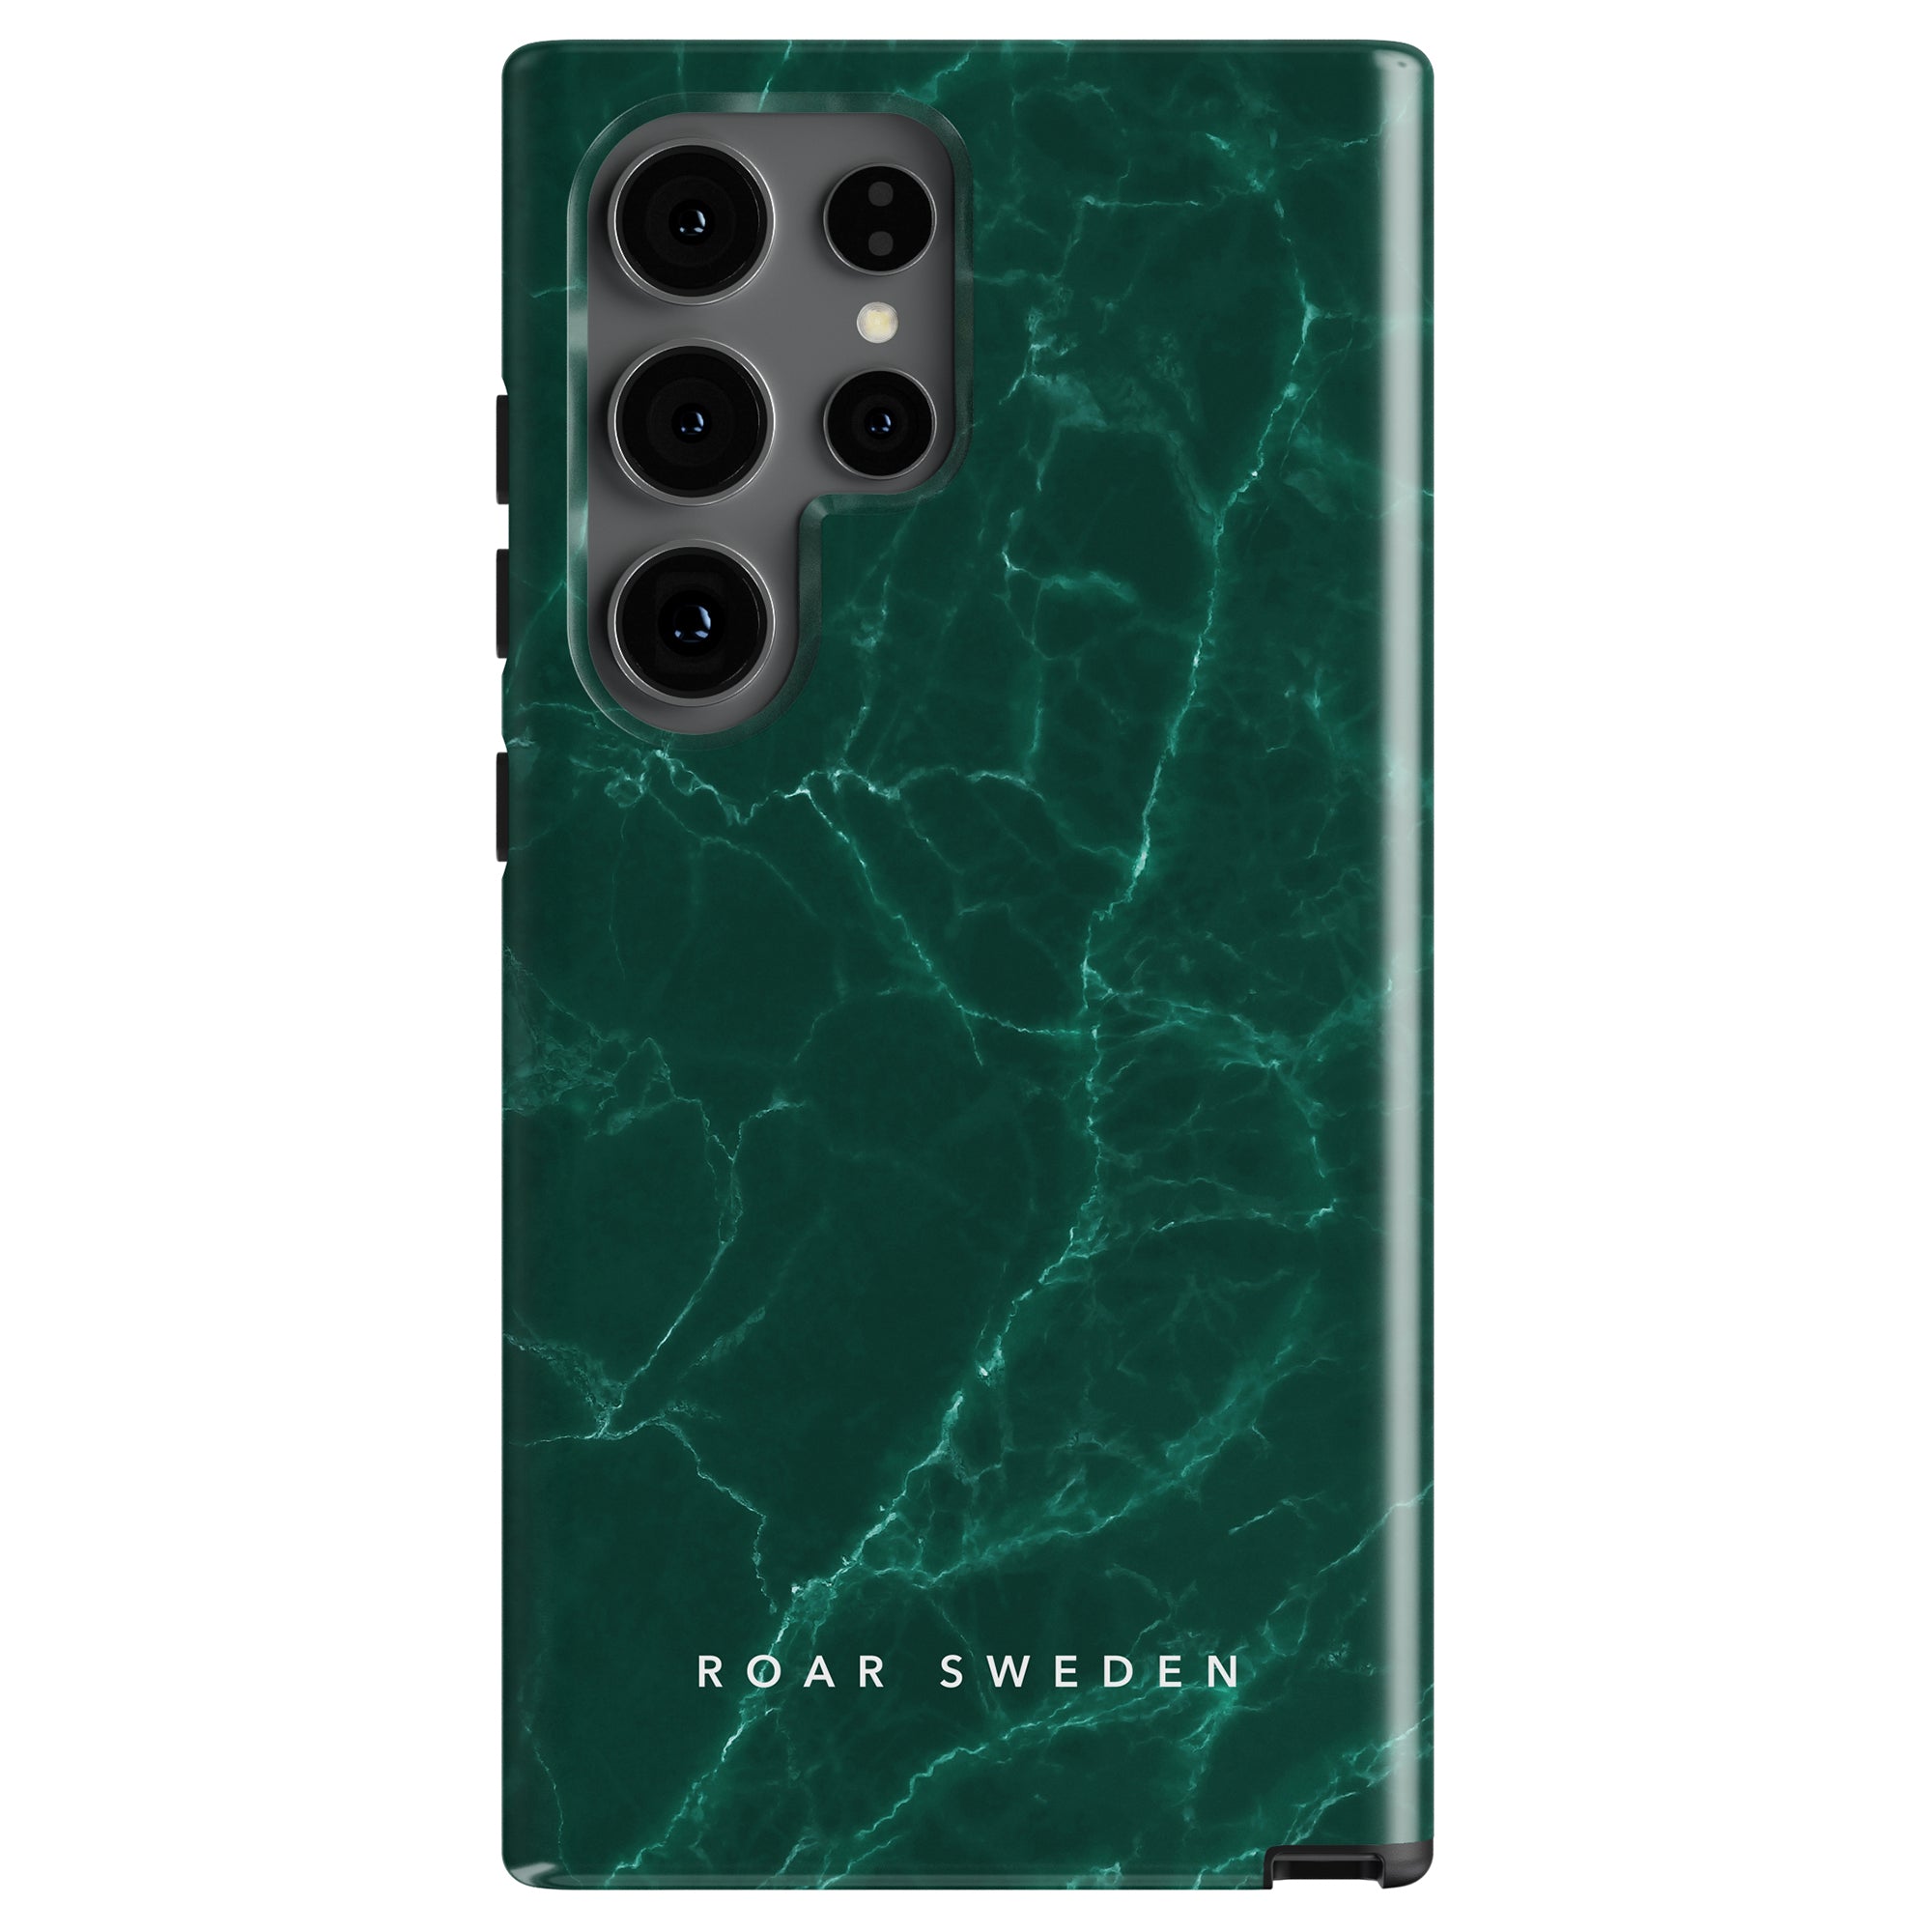 A mobilskal with a green marble havsinspirerade design and black camera cutouts. The lower part of the case features the text "ROAR SWEDEN" in white, making it a Ripples - Tough Case that's both stylish and durable.